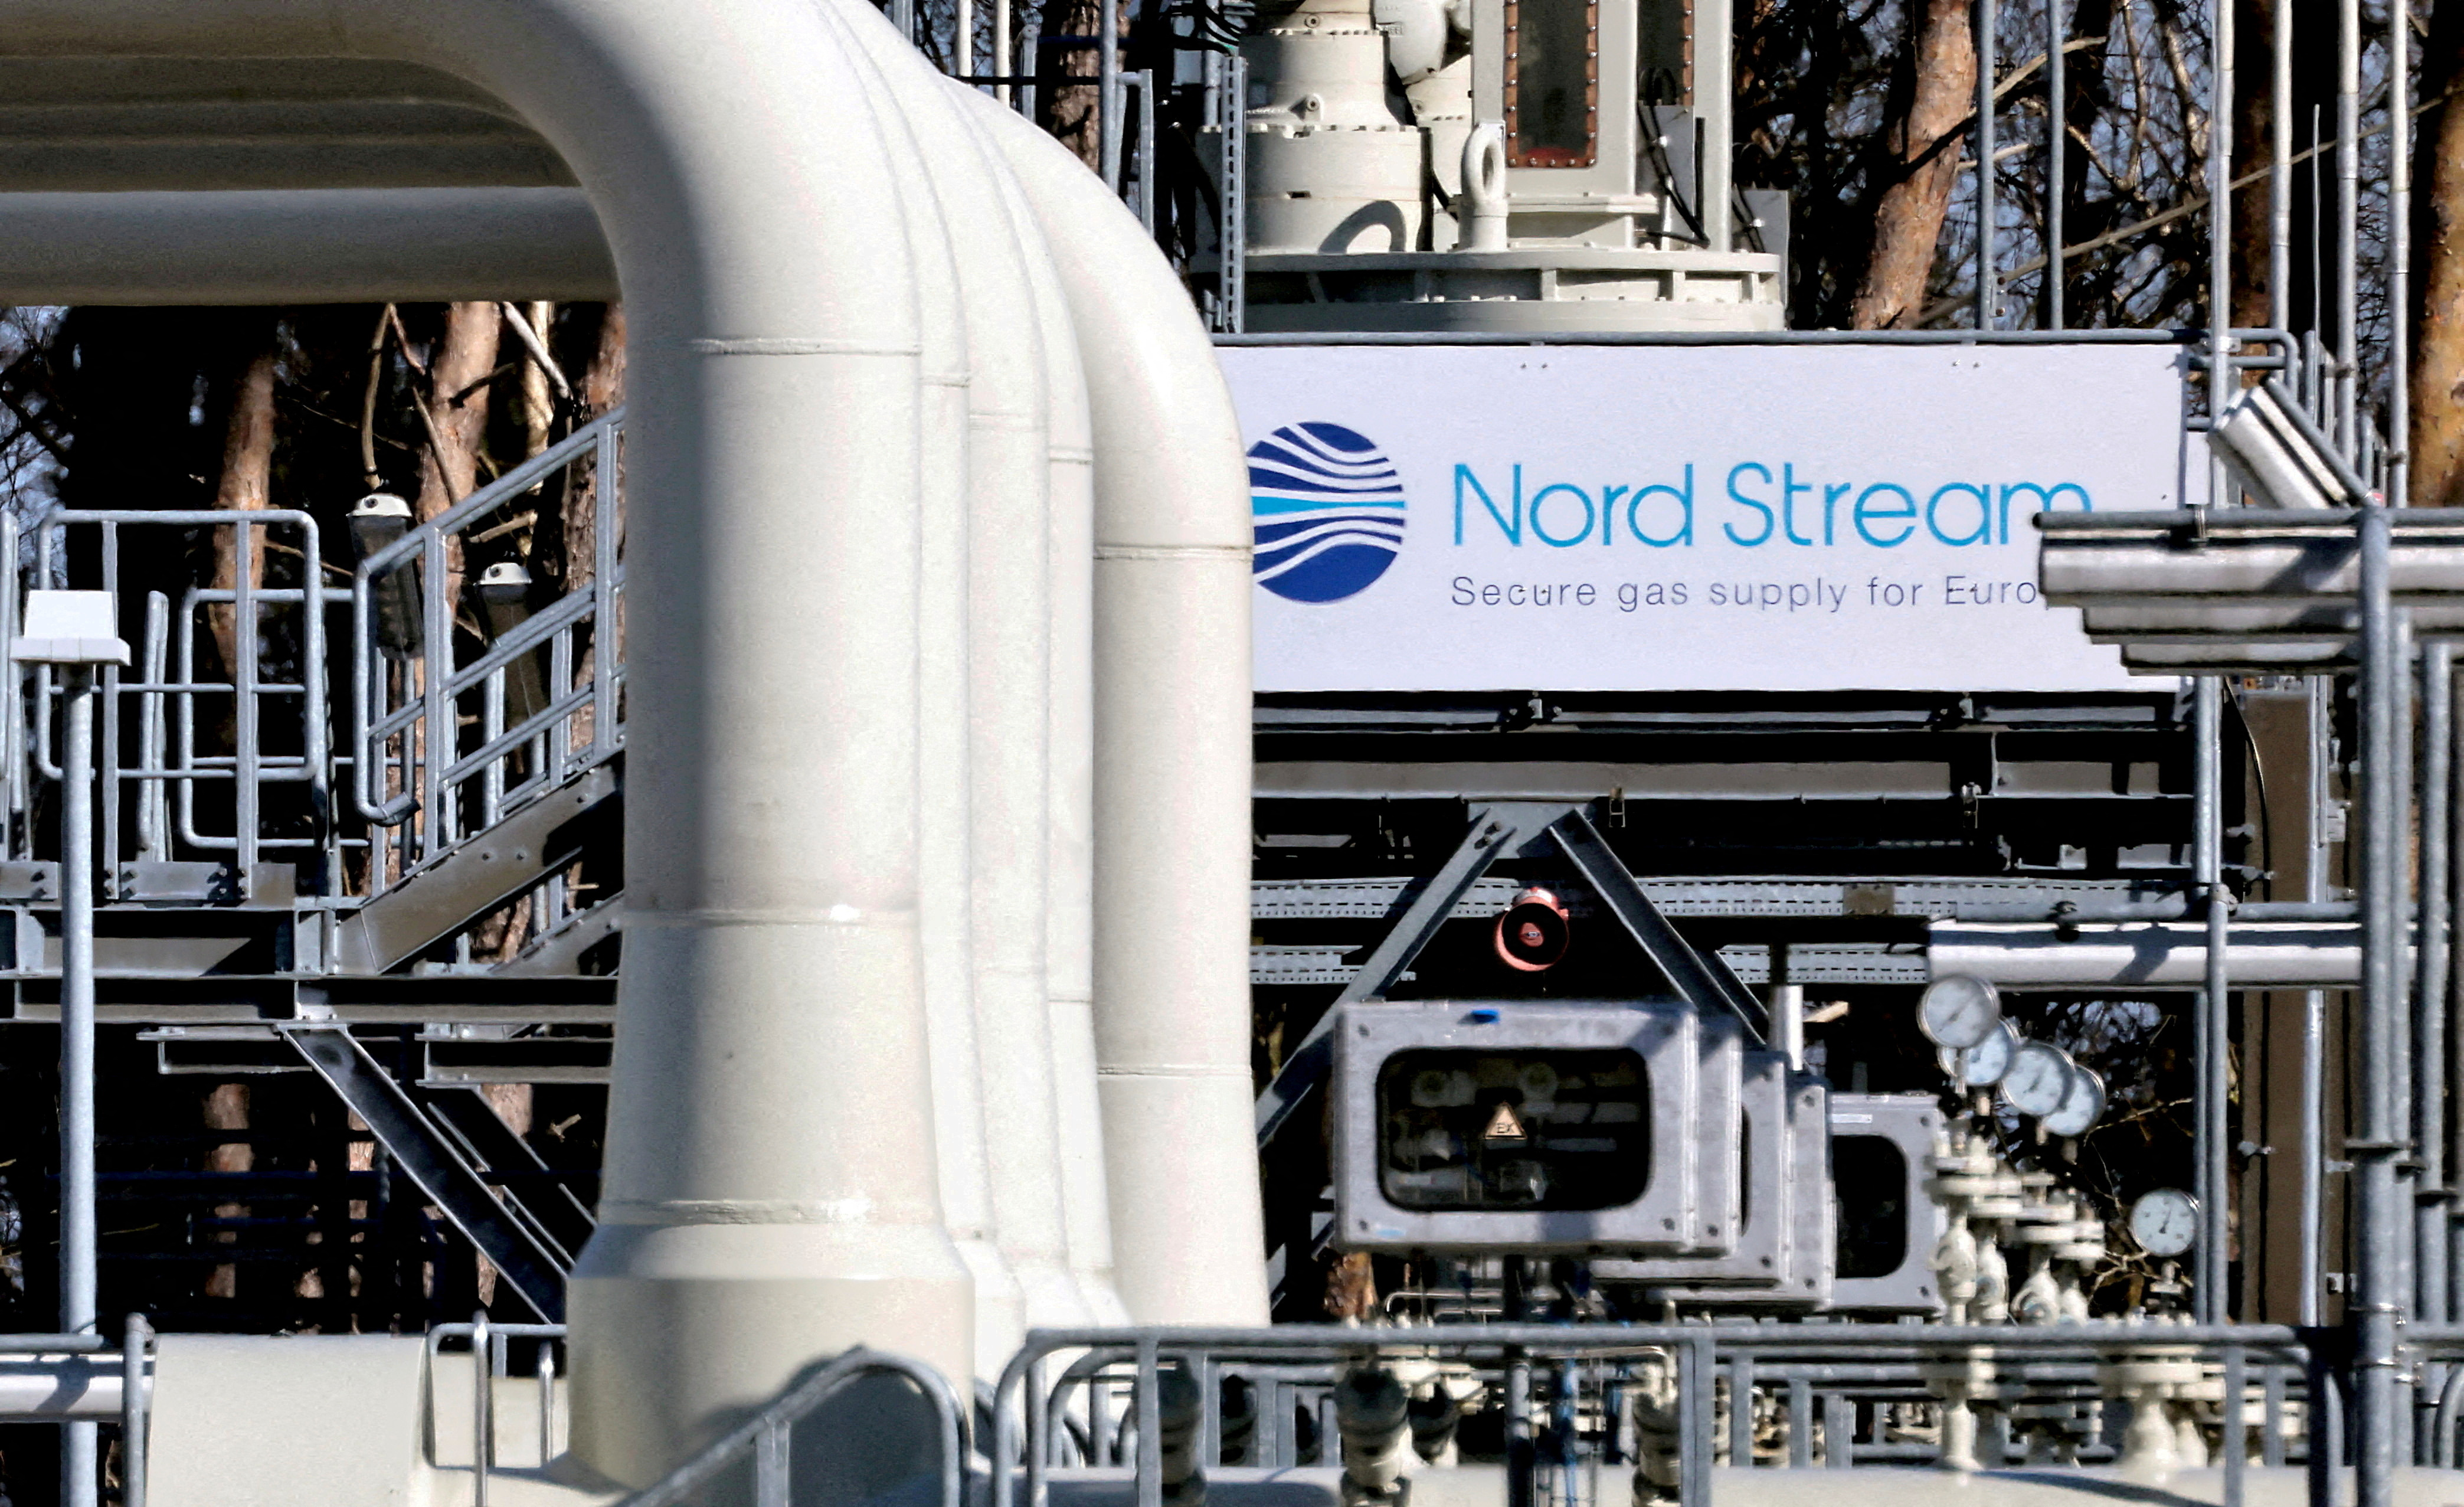  the Nord Stream 1 gas pipeline in Lubmin, Germany